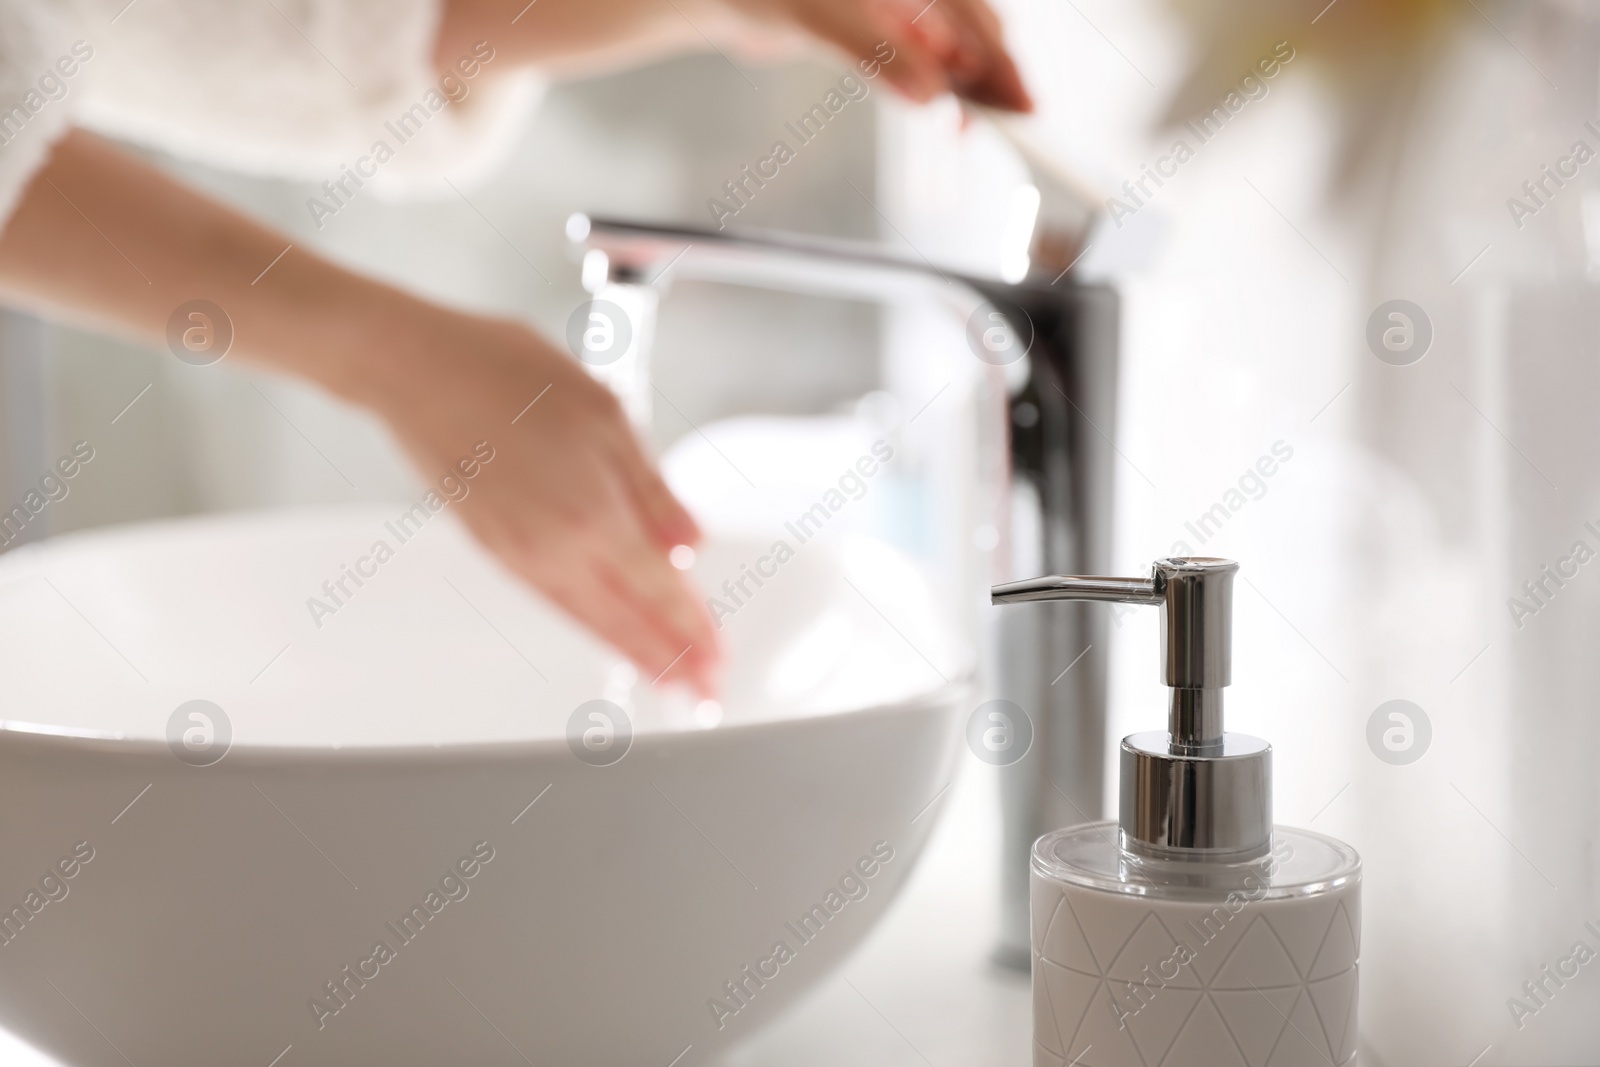 Photo of Woman washing hands over sink in bathroom, focus on soap dispenser